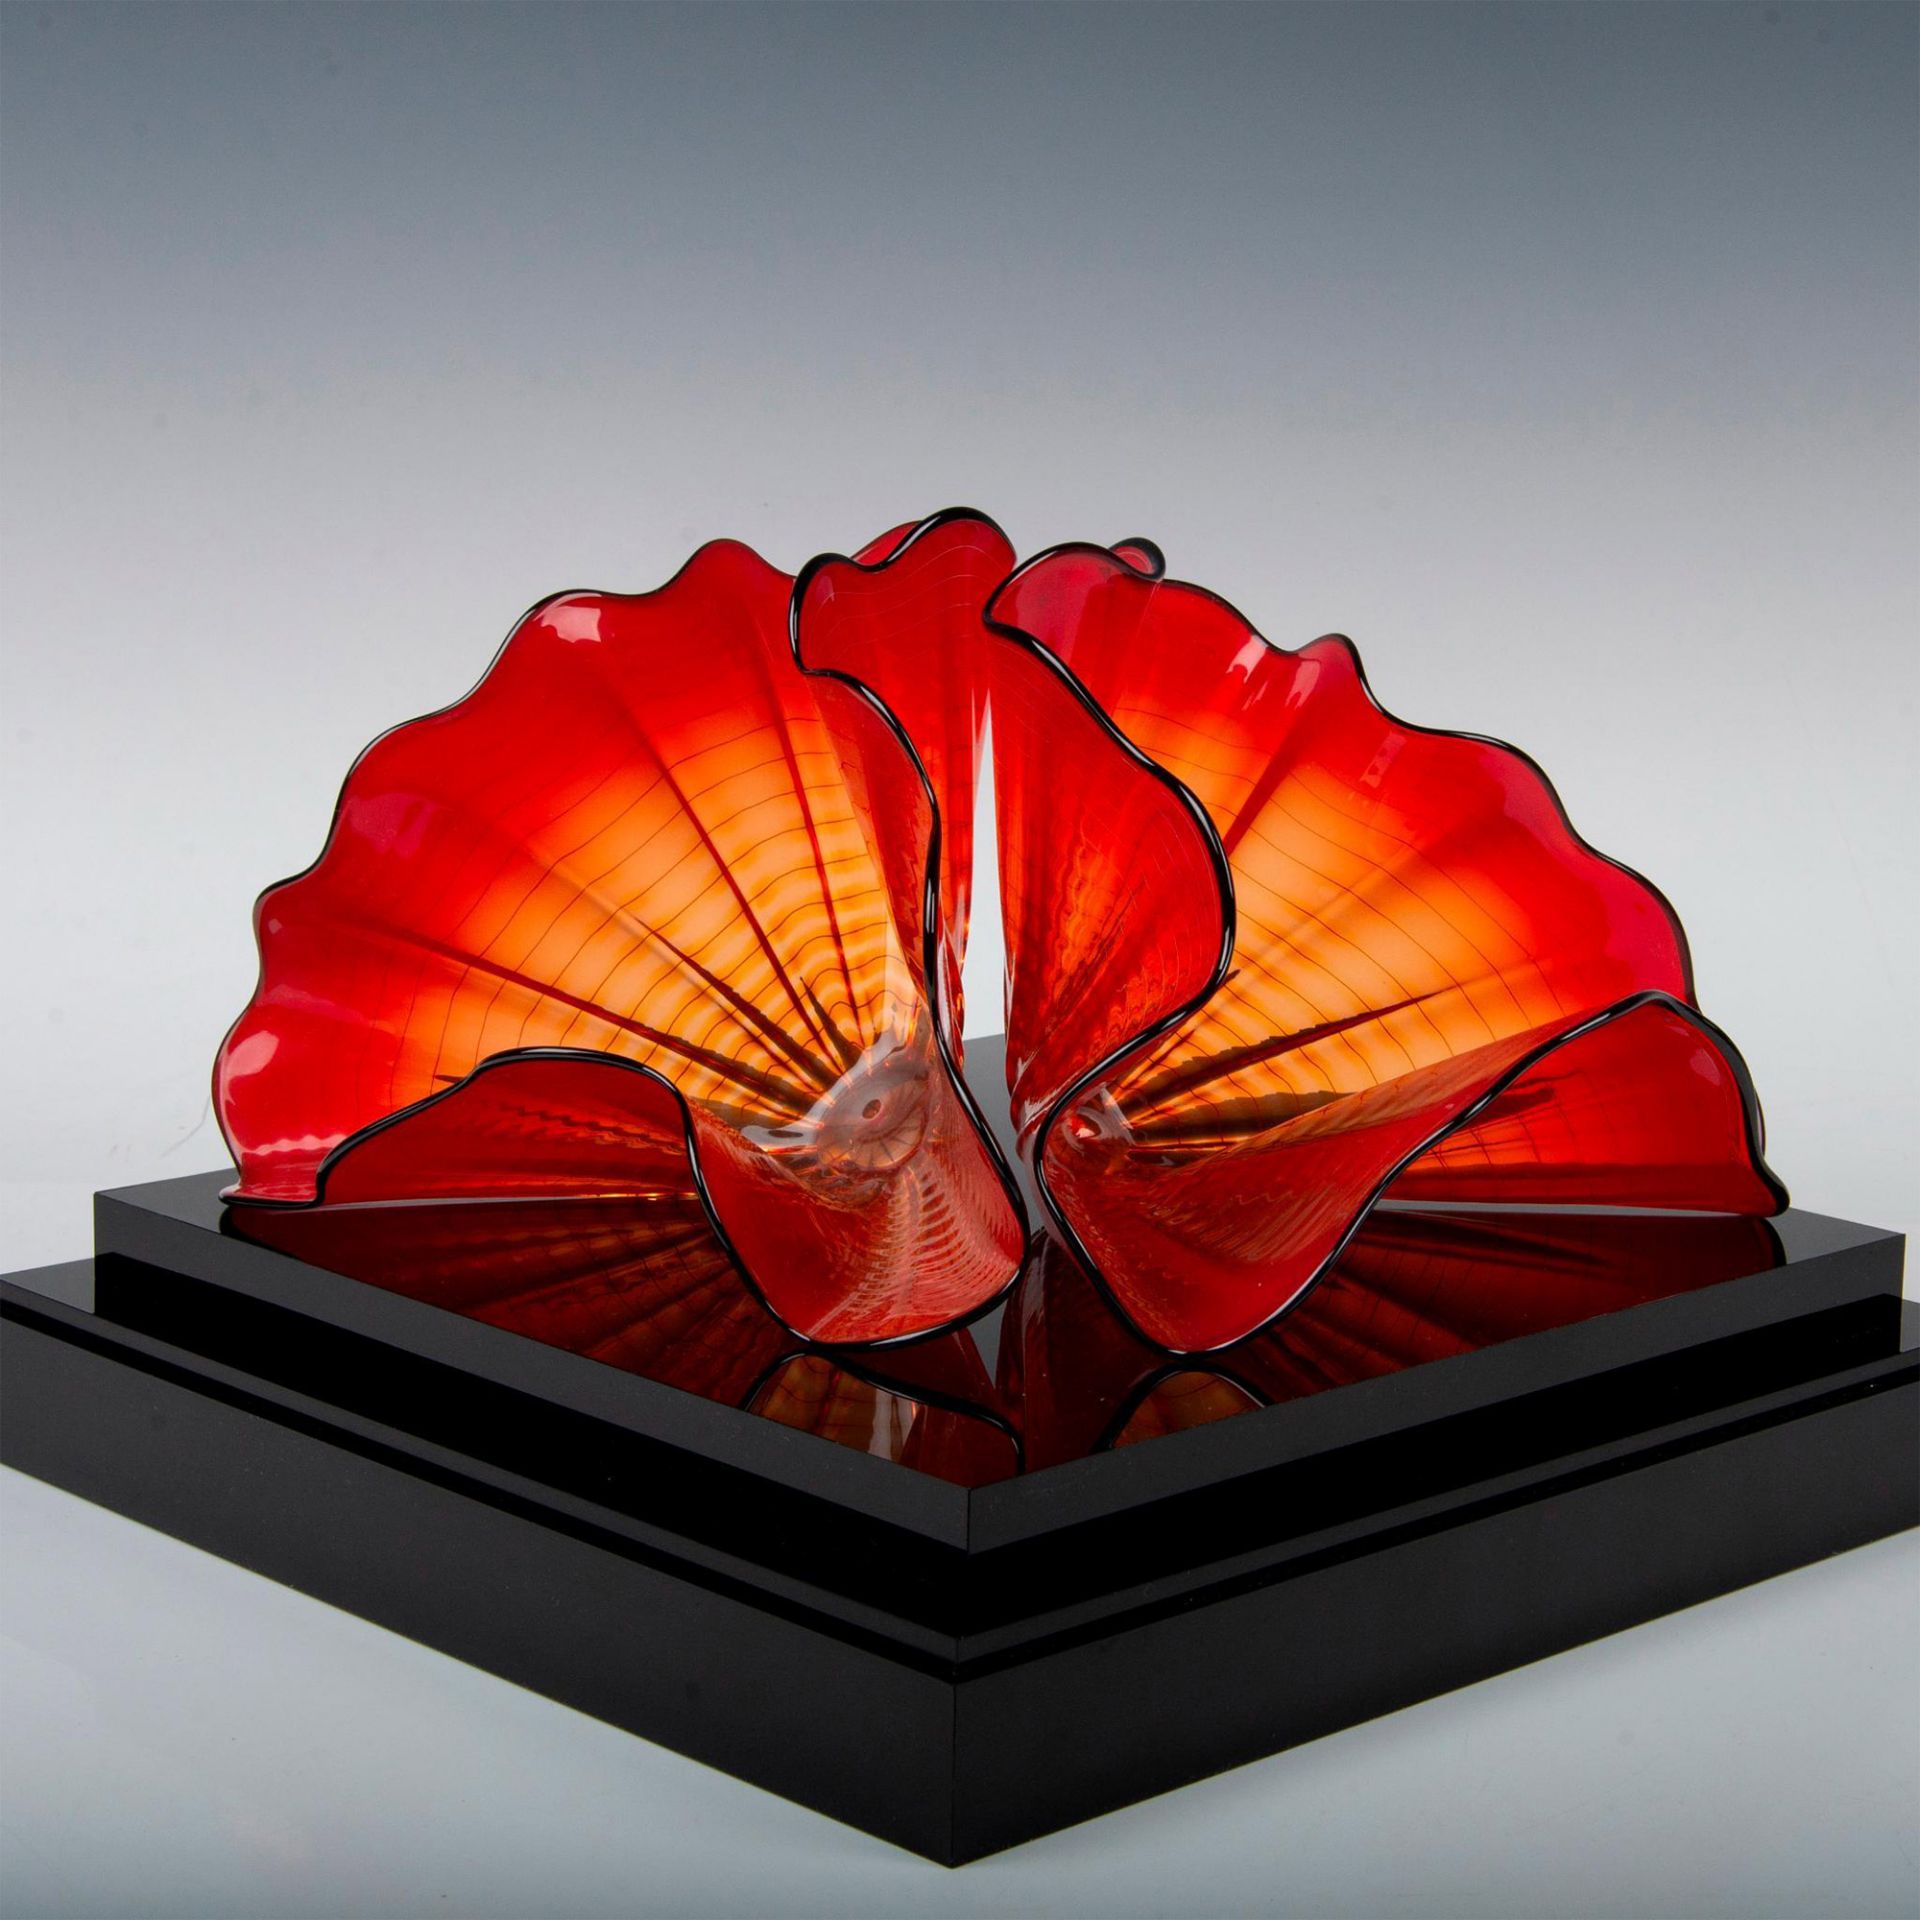 Dale Chihuly Portland Press Art Glass, Red Amber Persian Pair - Image 6 of 20